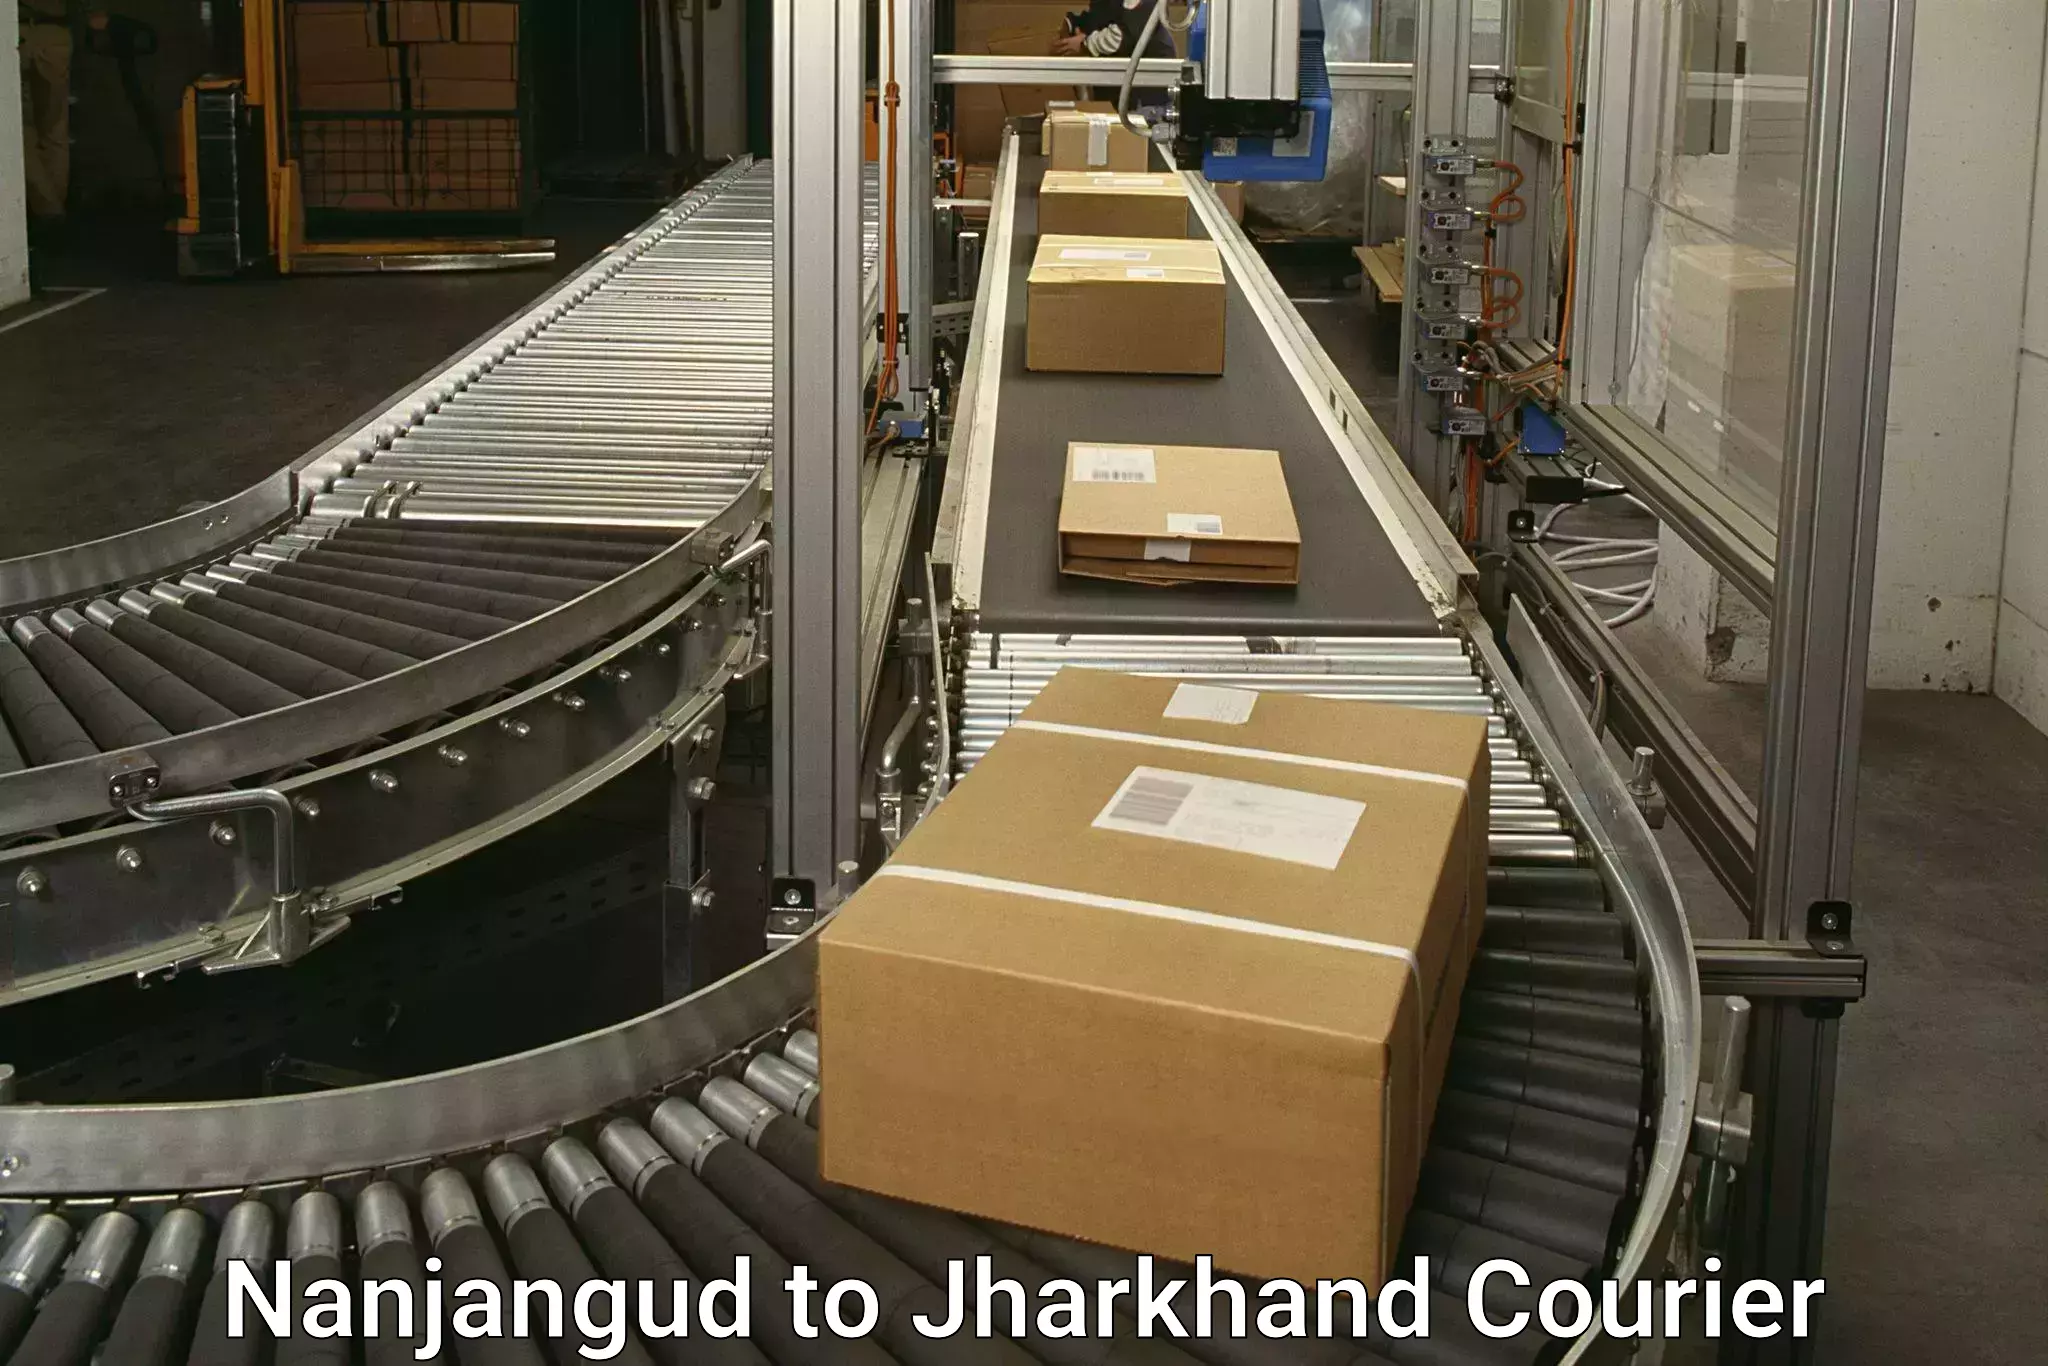 Cargo delivery service Nanjangud to Chandwa